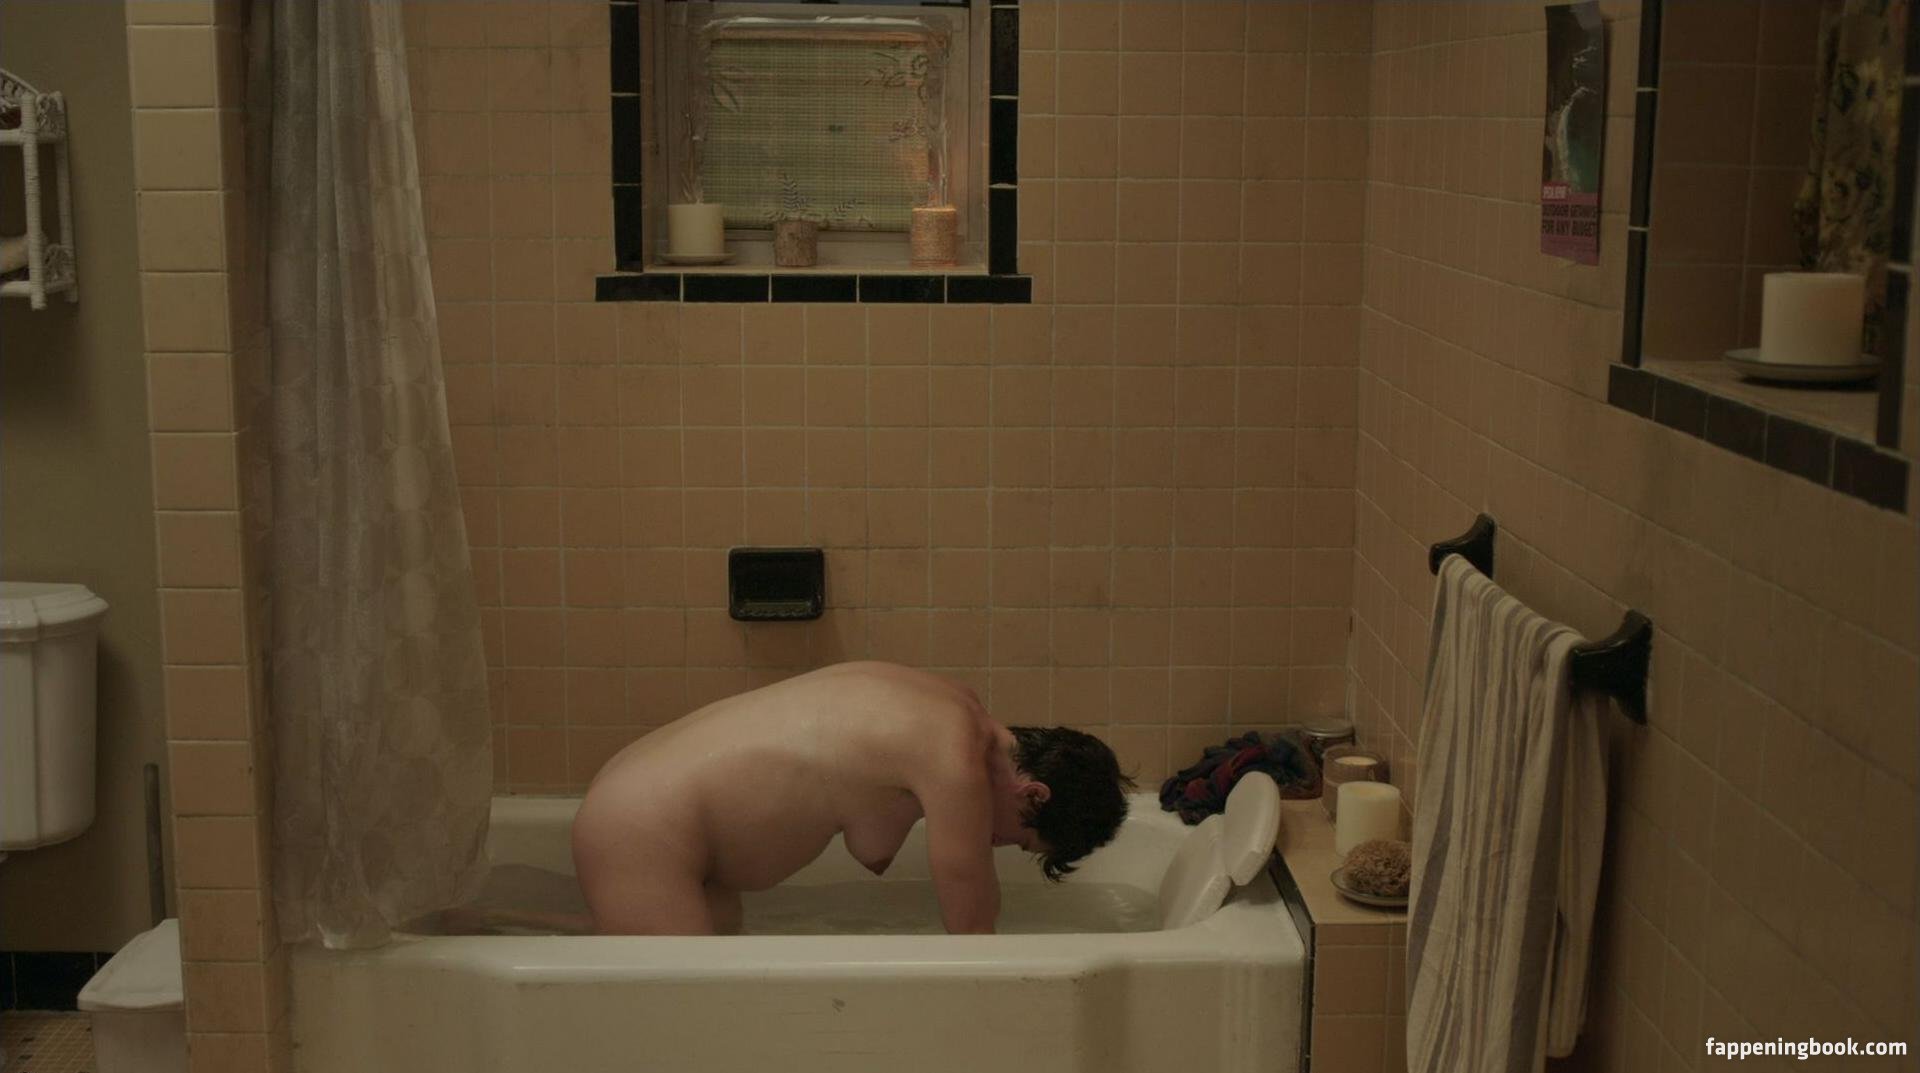 Gaby Hoffmann Nude, The Fappening - Photo #194482 - FappeningBook.